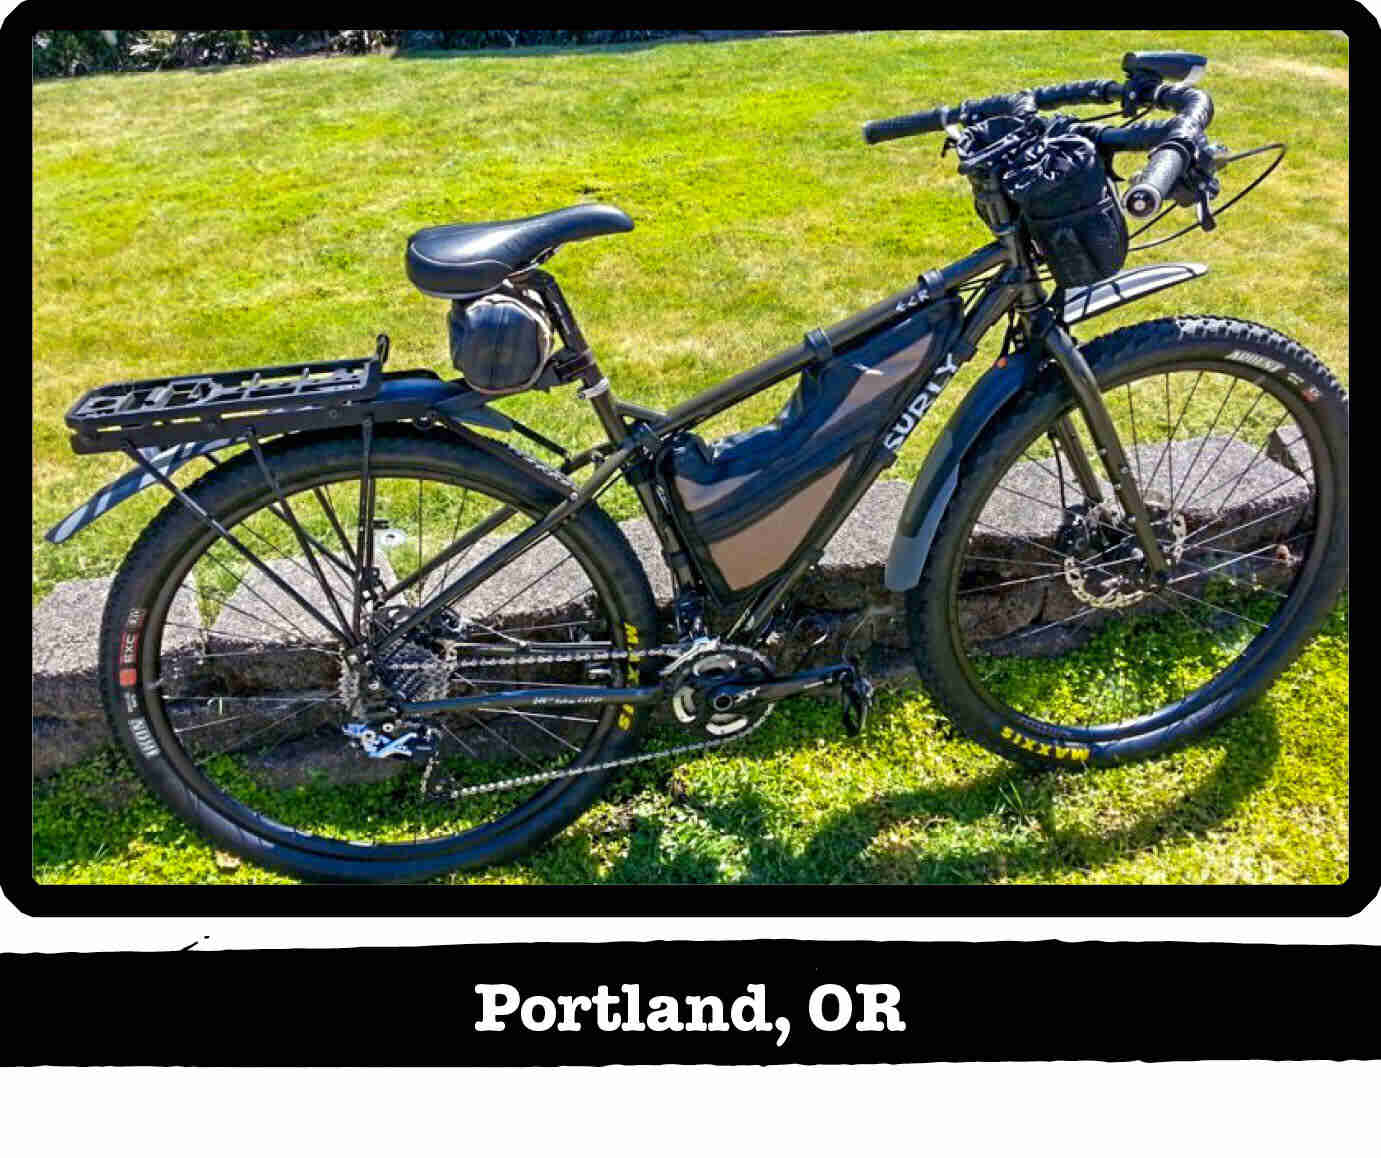 Right side view of a Surly ECR bike on grass - Portland, OR tag below image